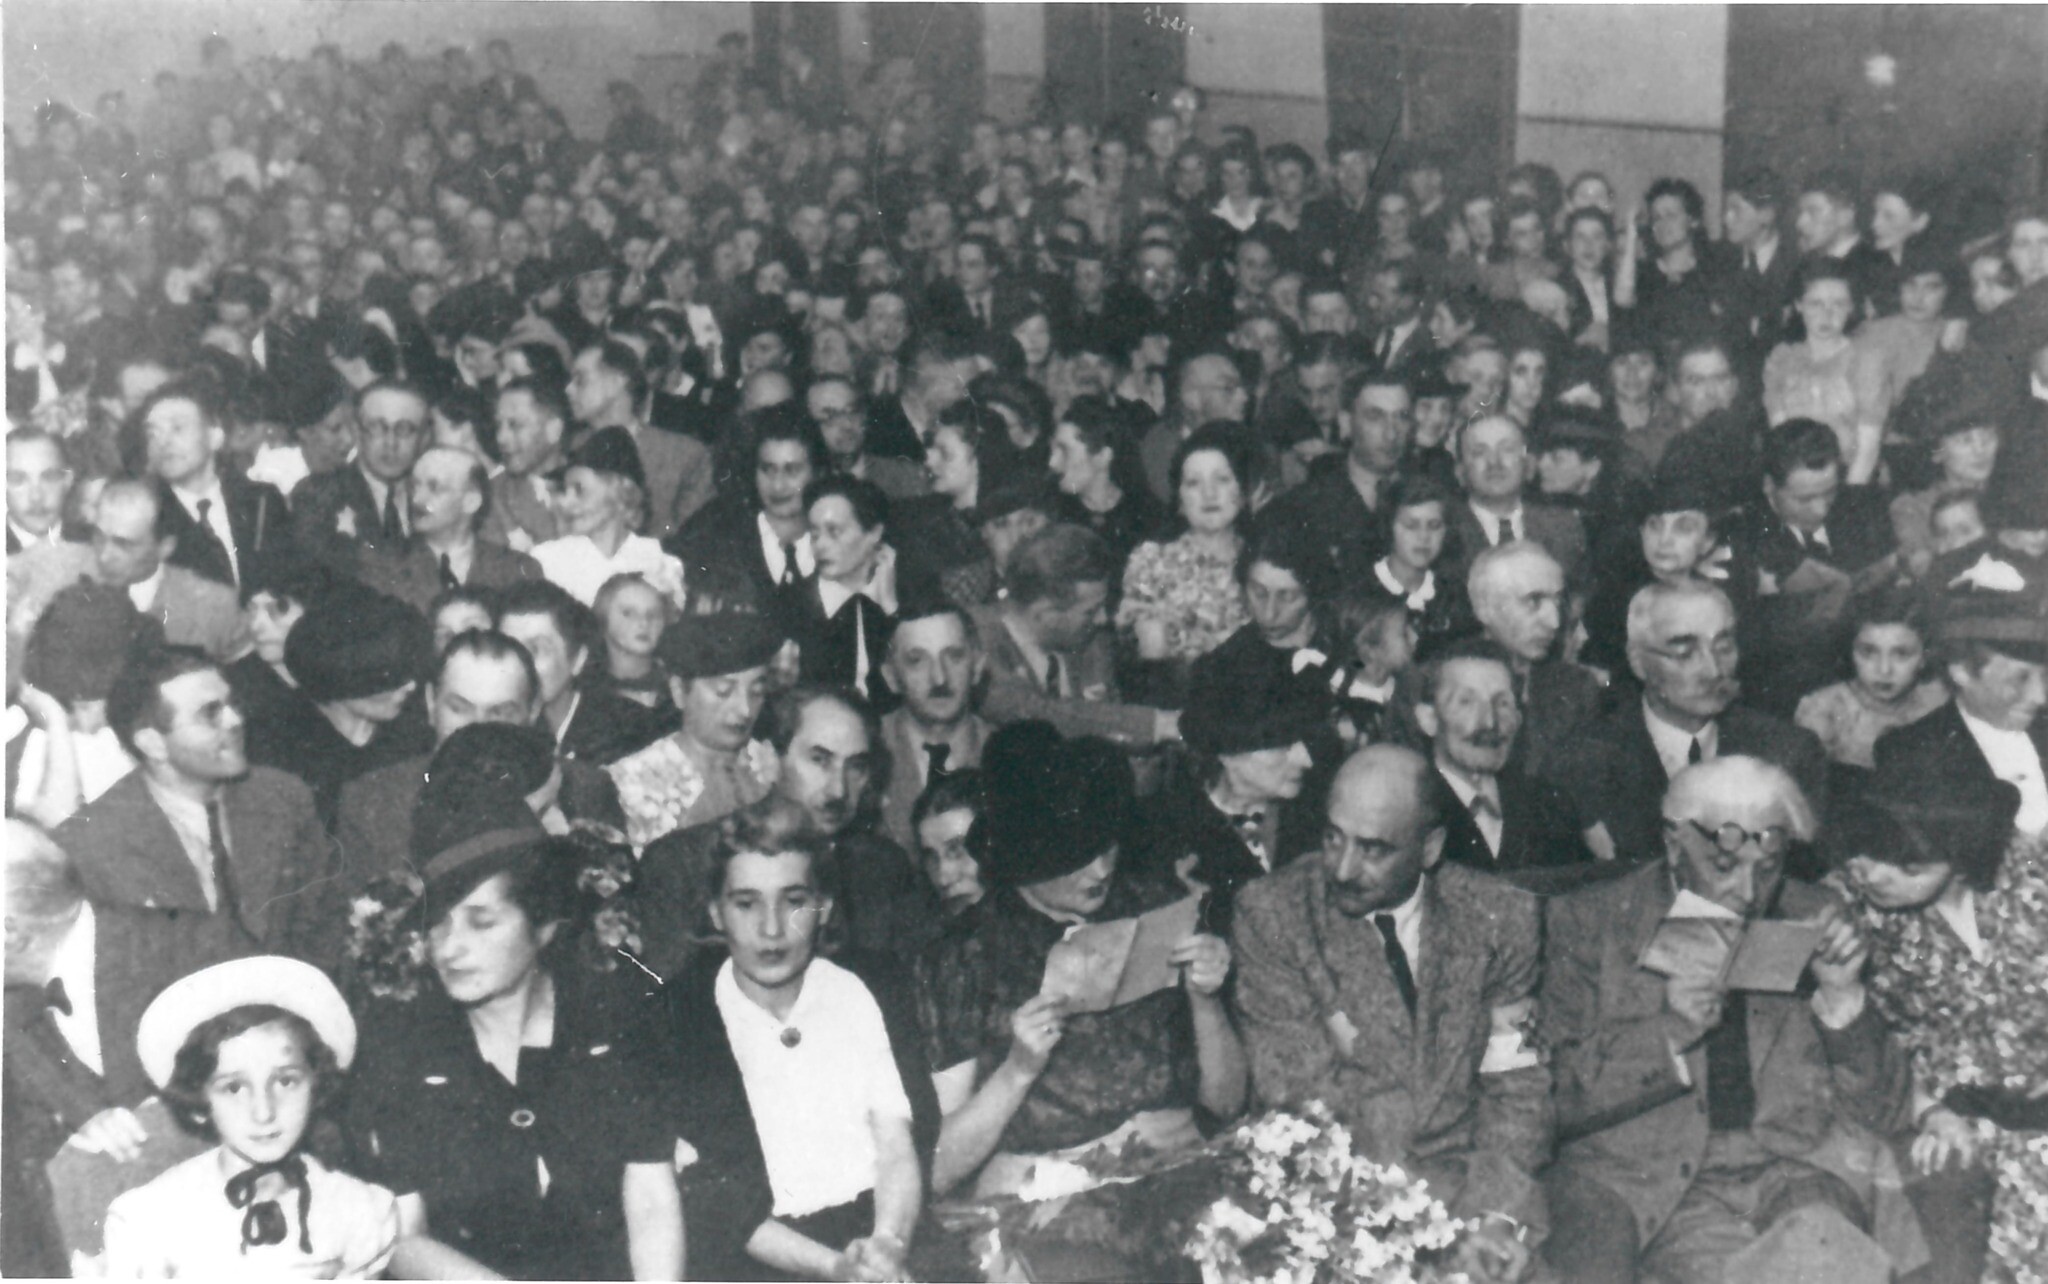 A musical evening in the Łódź Ghetto, circa 1940-1943. (Wiener Holocaust Library Collections)